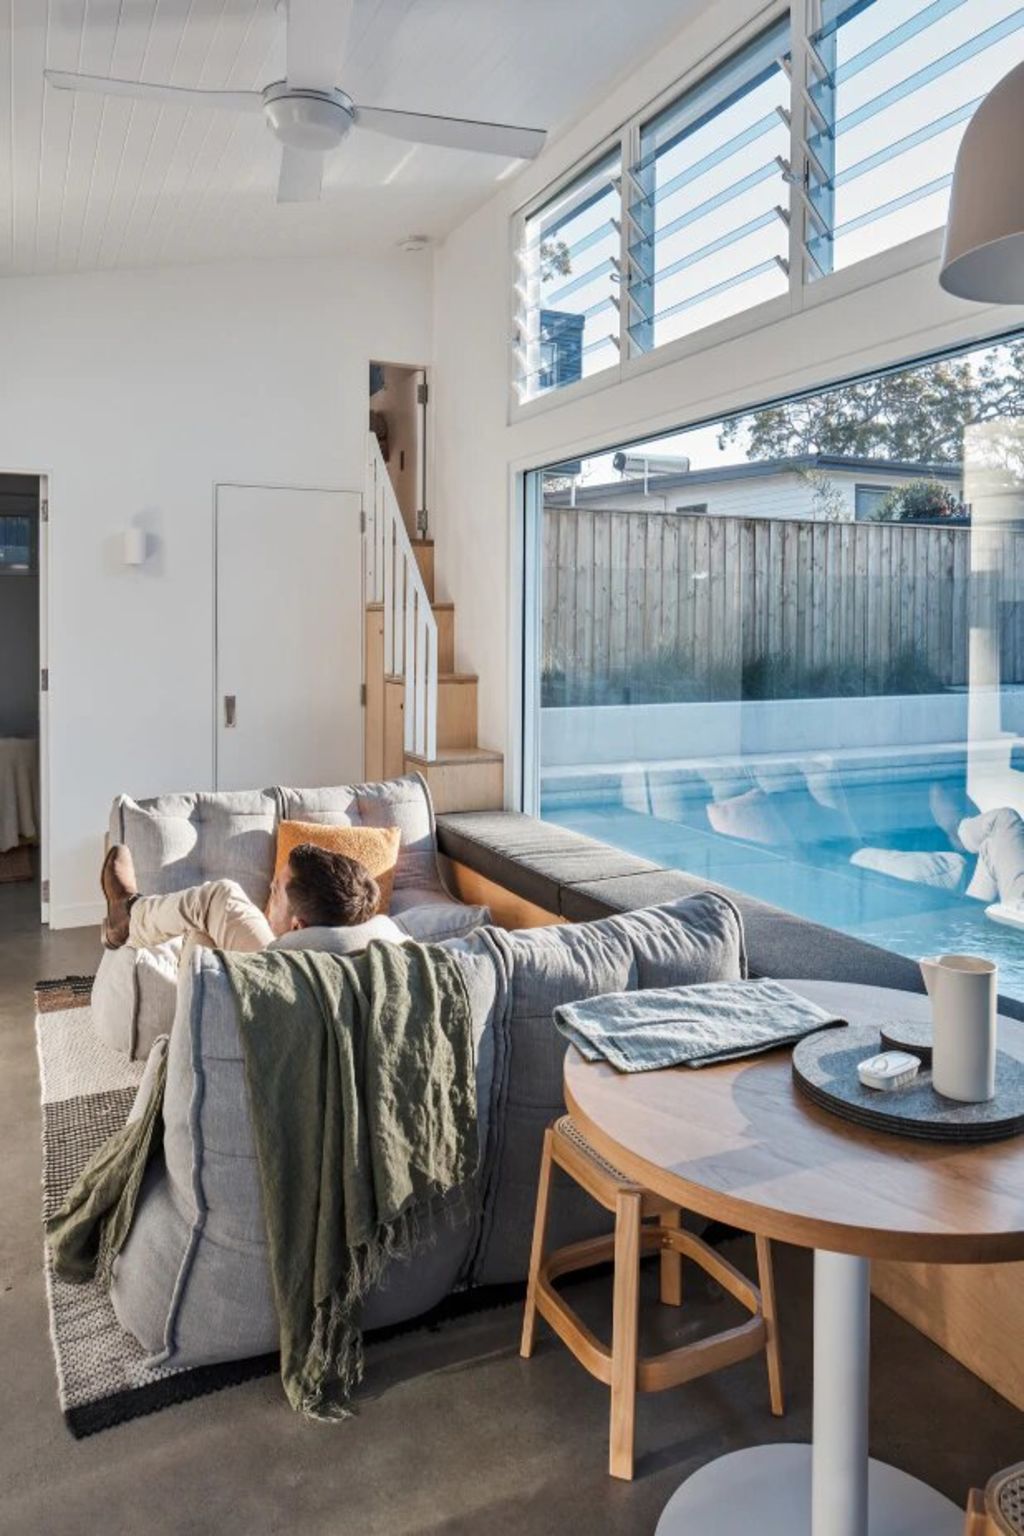 High windows let in plenty of light, as does the glazed wall looking out to the pool. Photo: Andy MacPherson